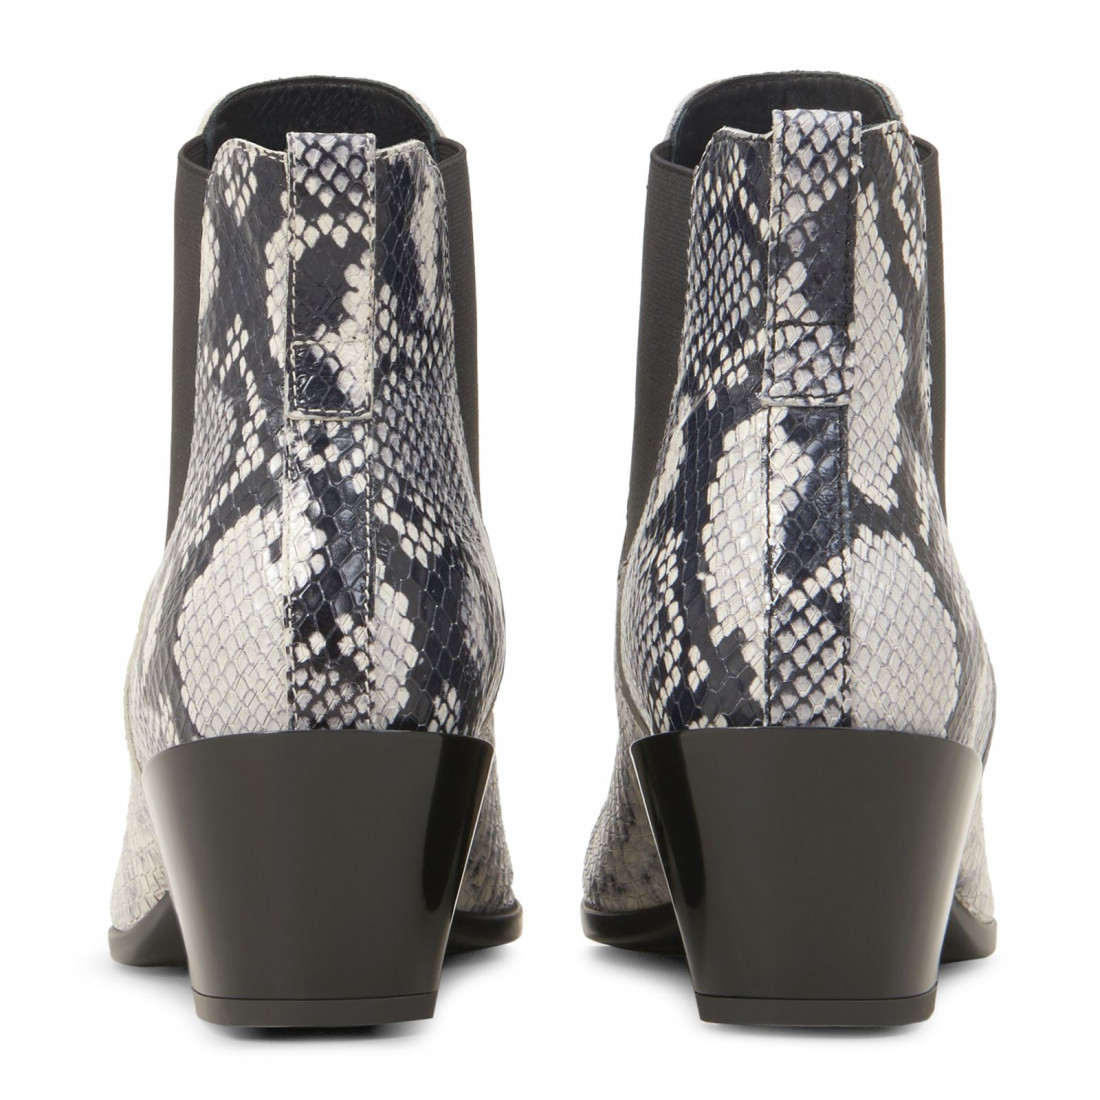 Women's Hogan Texan Ankle Boots  in reptile-printed leather